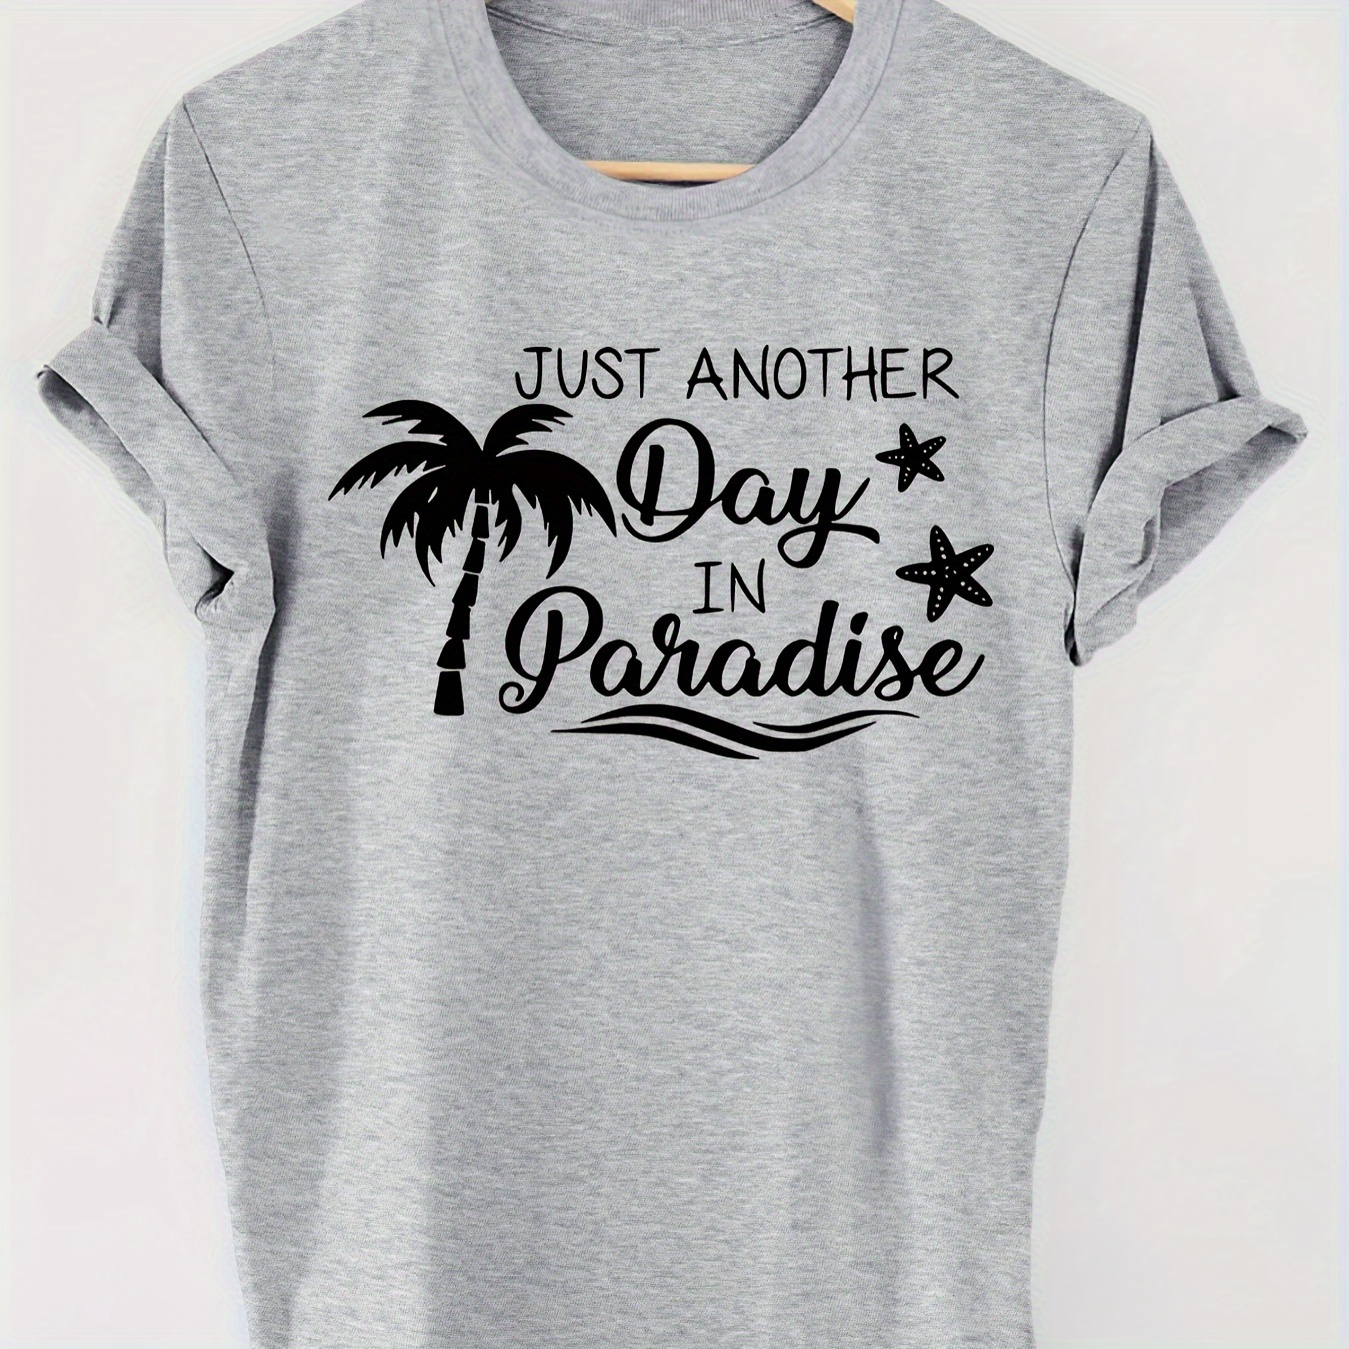 

Just Another Day In Paradise Print T-shirt, Short Sleeve Crew Neck Casual Top For Summer & Spring, Women's Clothing